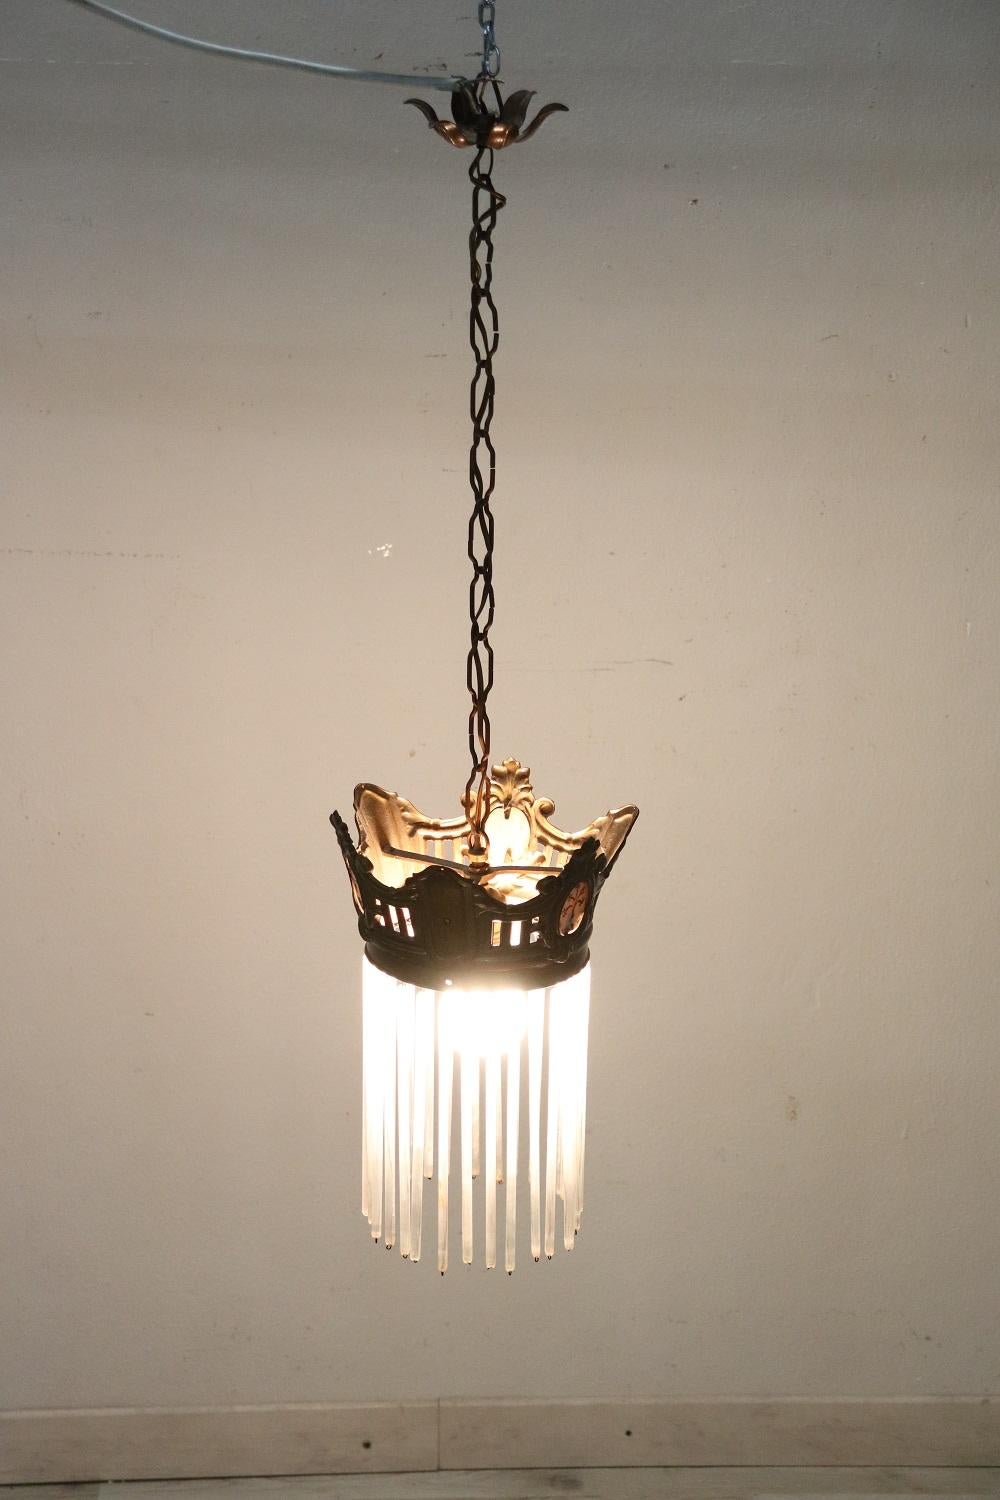 Splendid Italian Art Nouveau chandelier in gilded bronze 1-light, 1910s. Beautiful decorated with glass pendants. The bronze is finely chiseled. Perfect condition ready to light up your beautiful home.